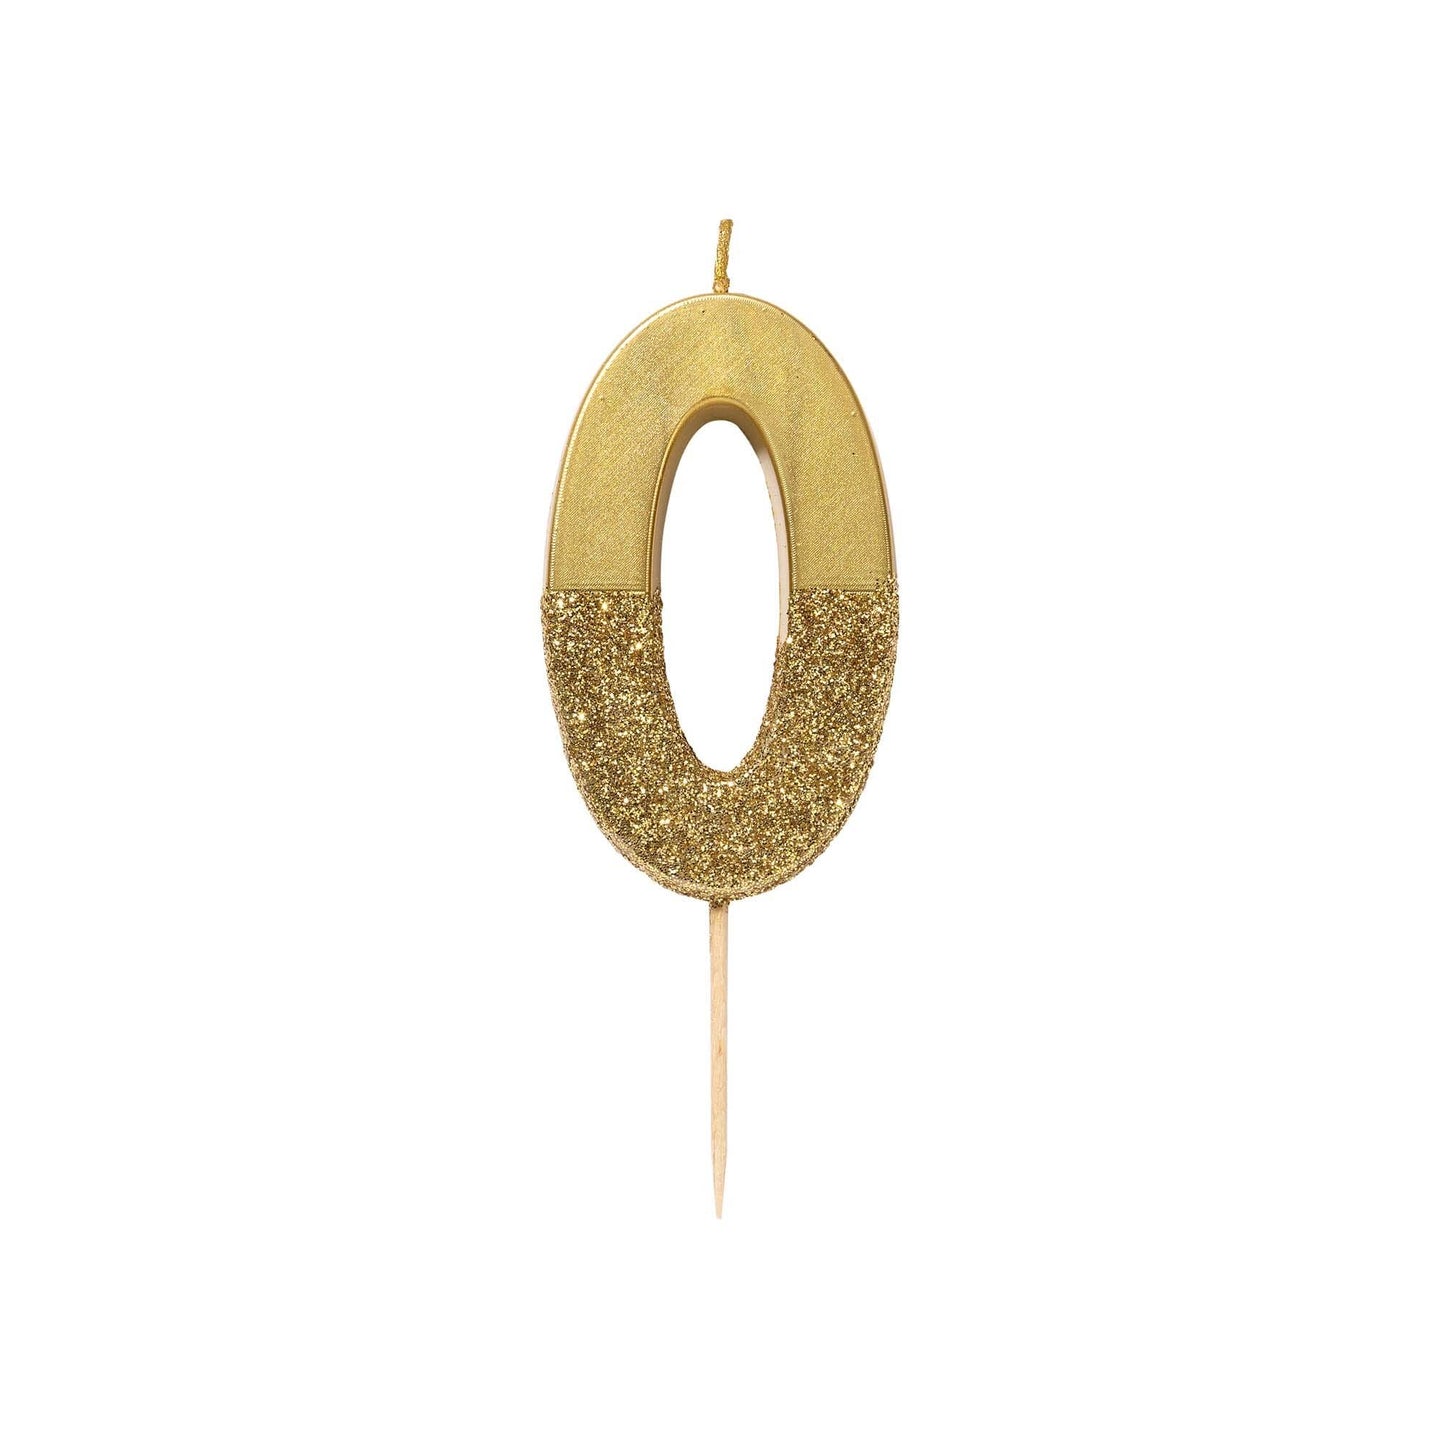 Gold Glitter Number Candles: 0